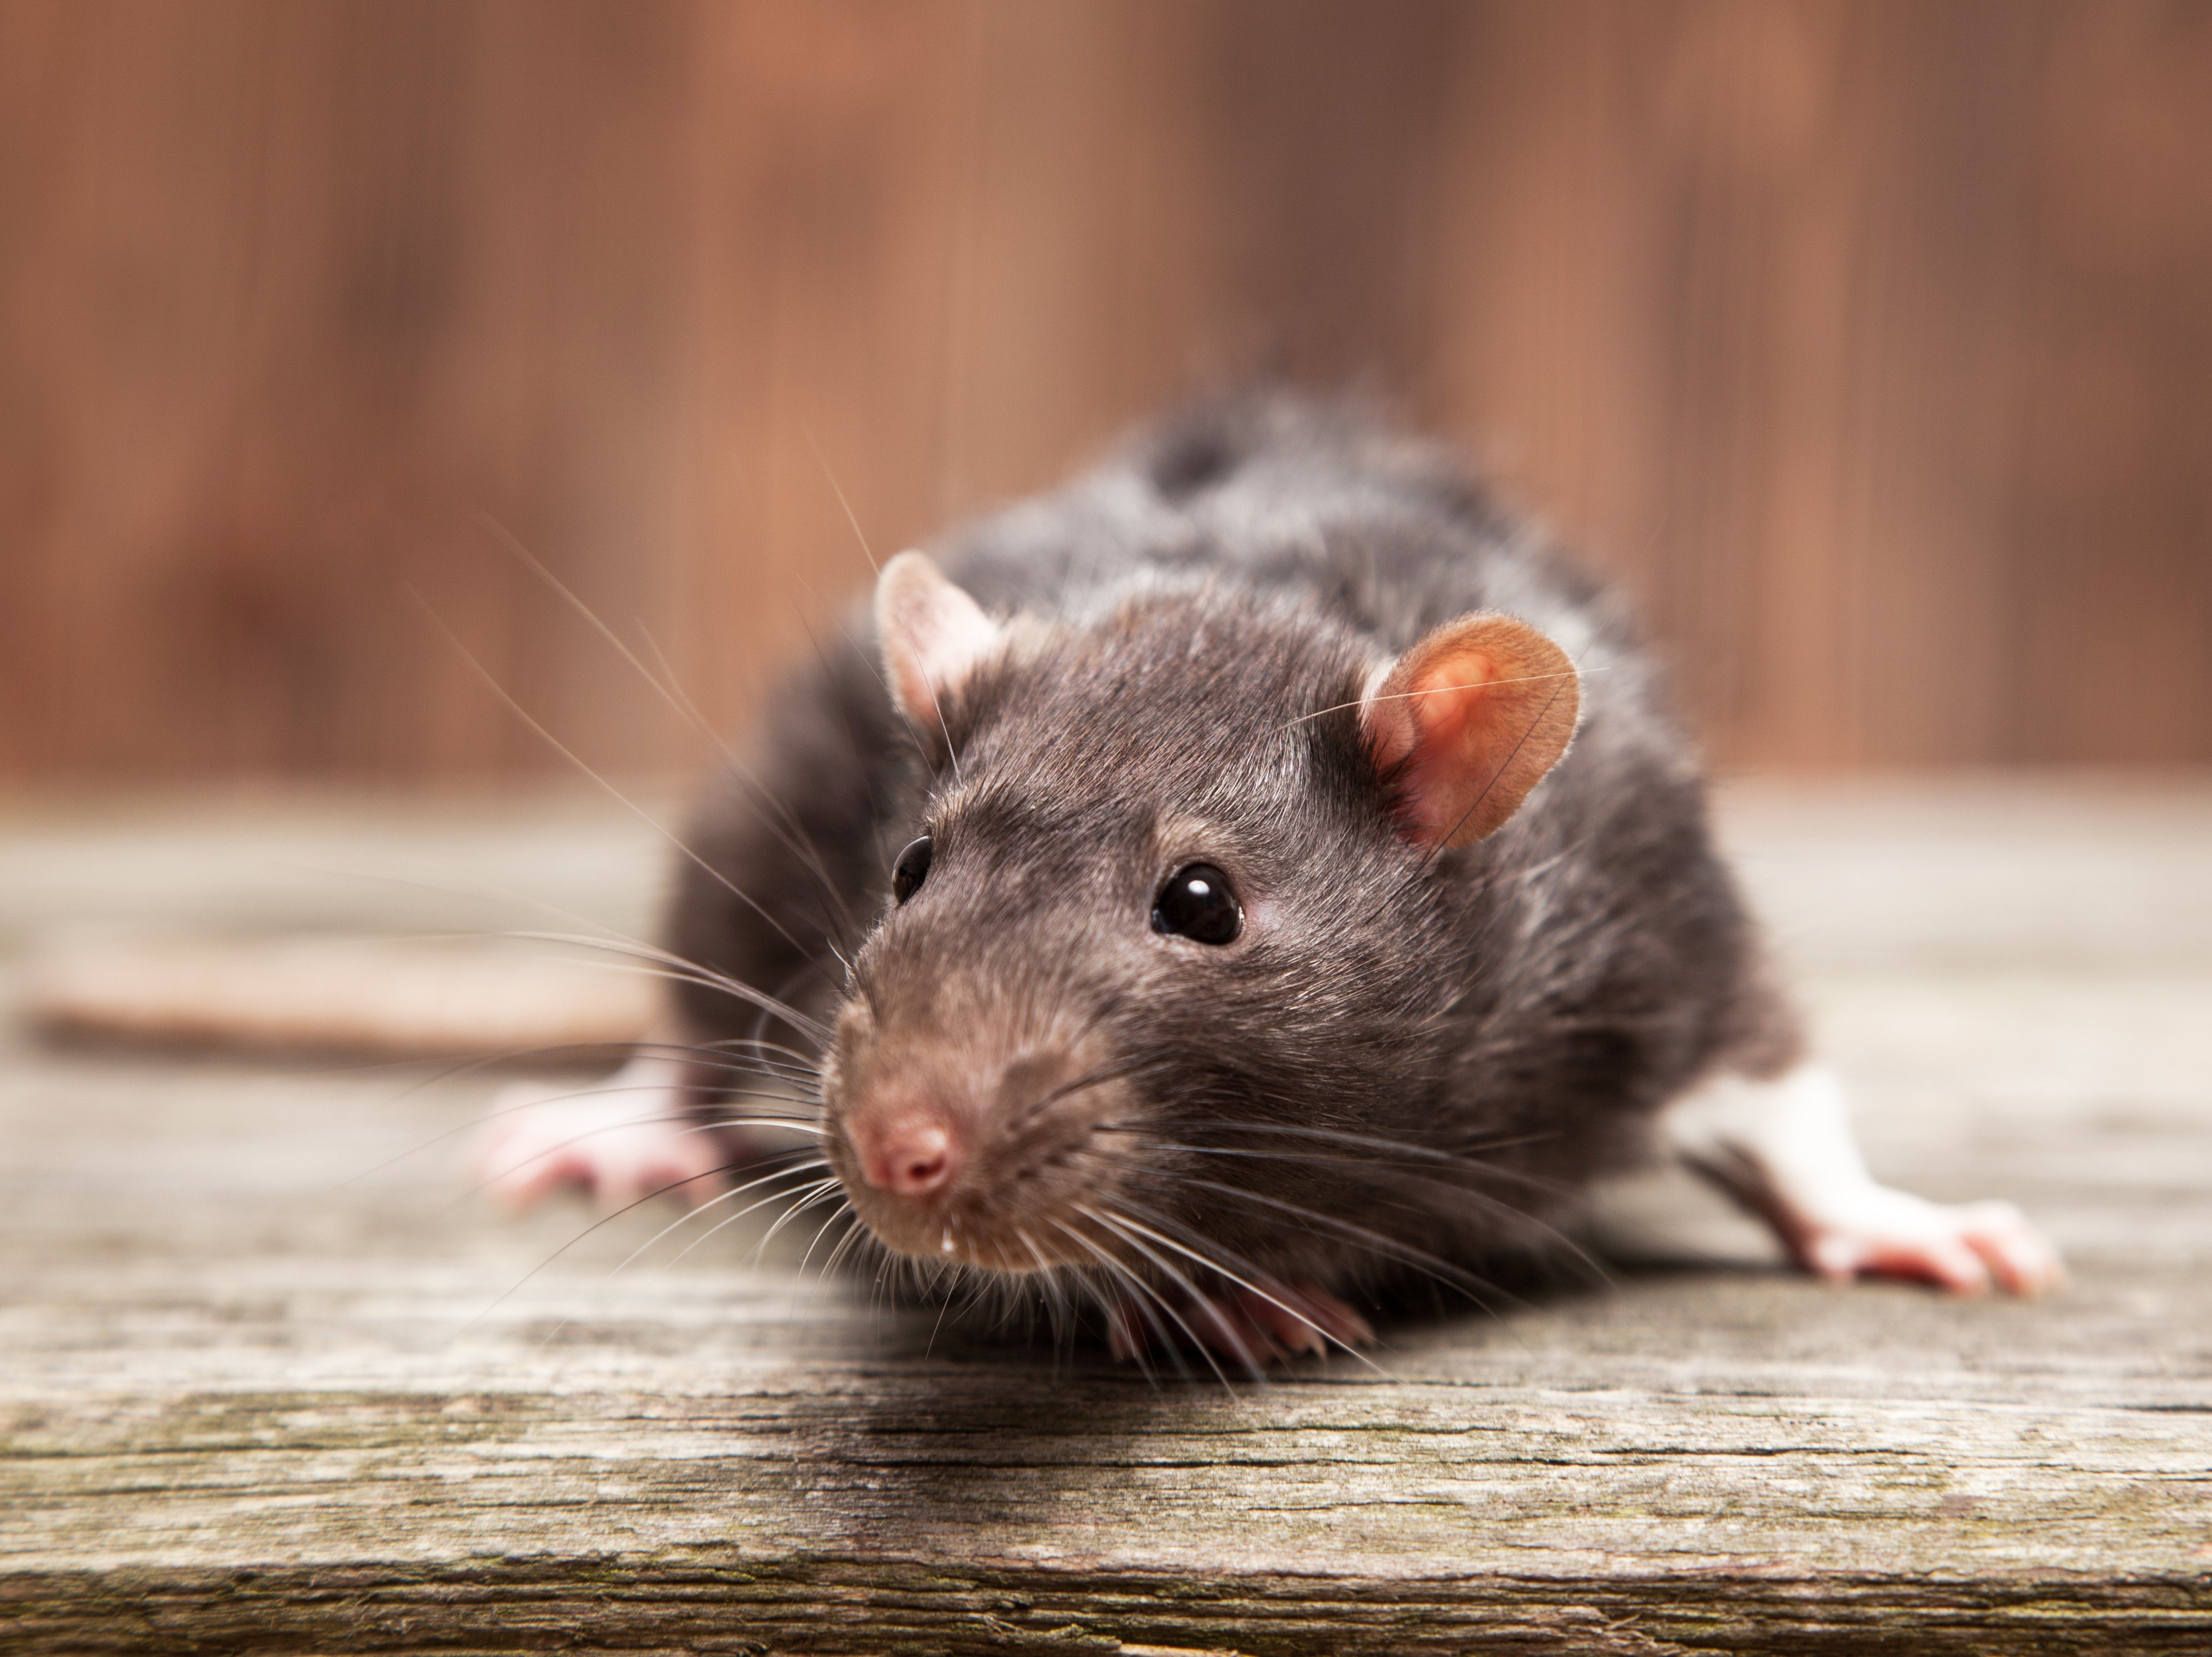 Britian is a nation of rat-haters – it’s time to change that